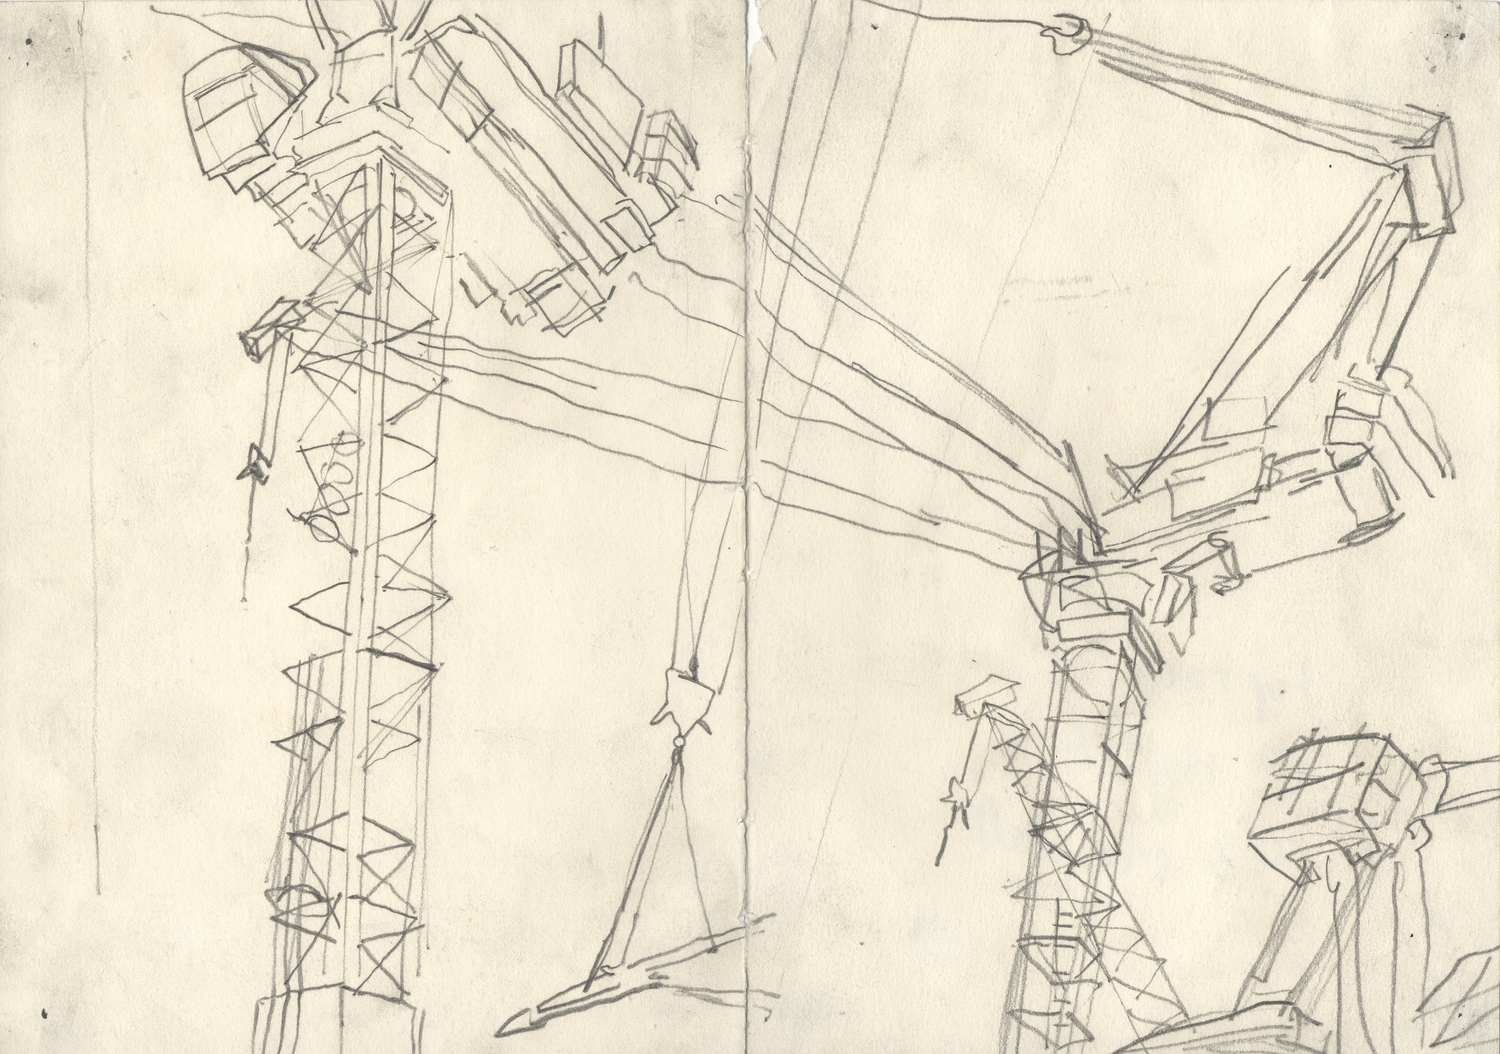 Graphite_drawing_by_Alexandra_Blum_cranes_seen_from_Peace_Mural_Dalston_London.jpg